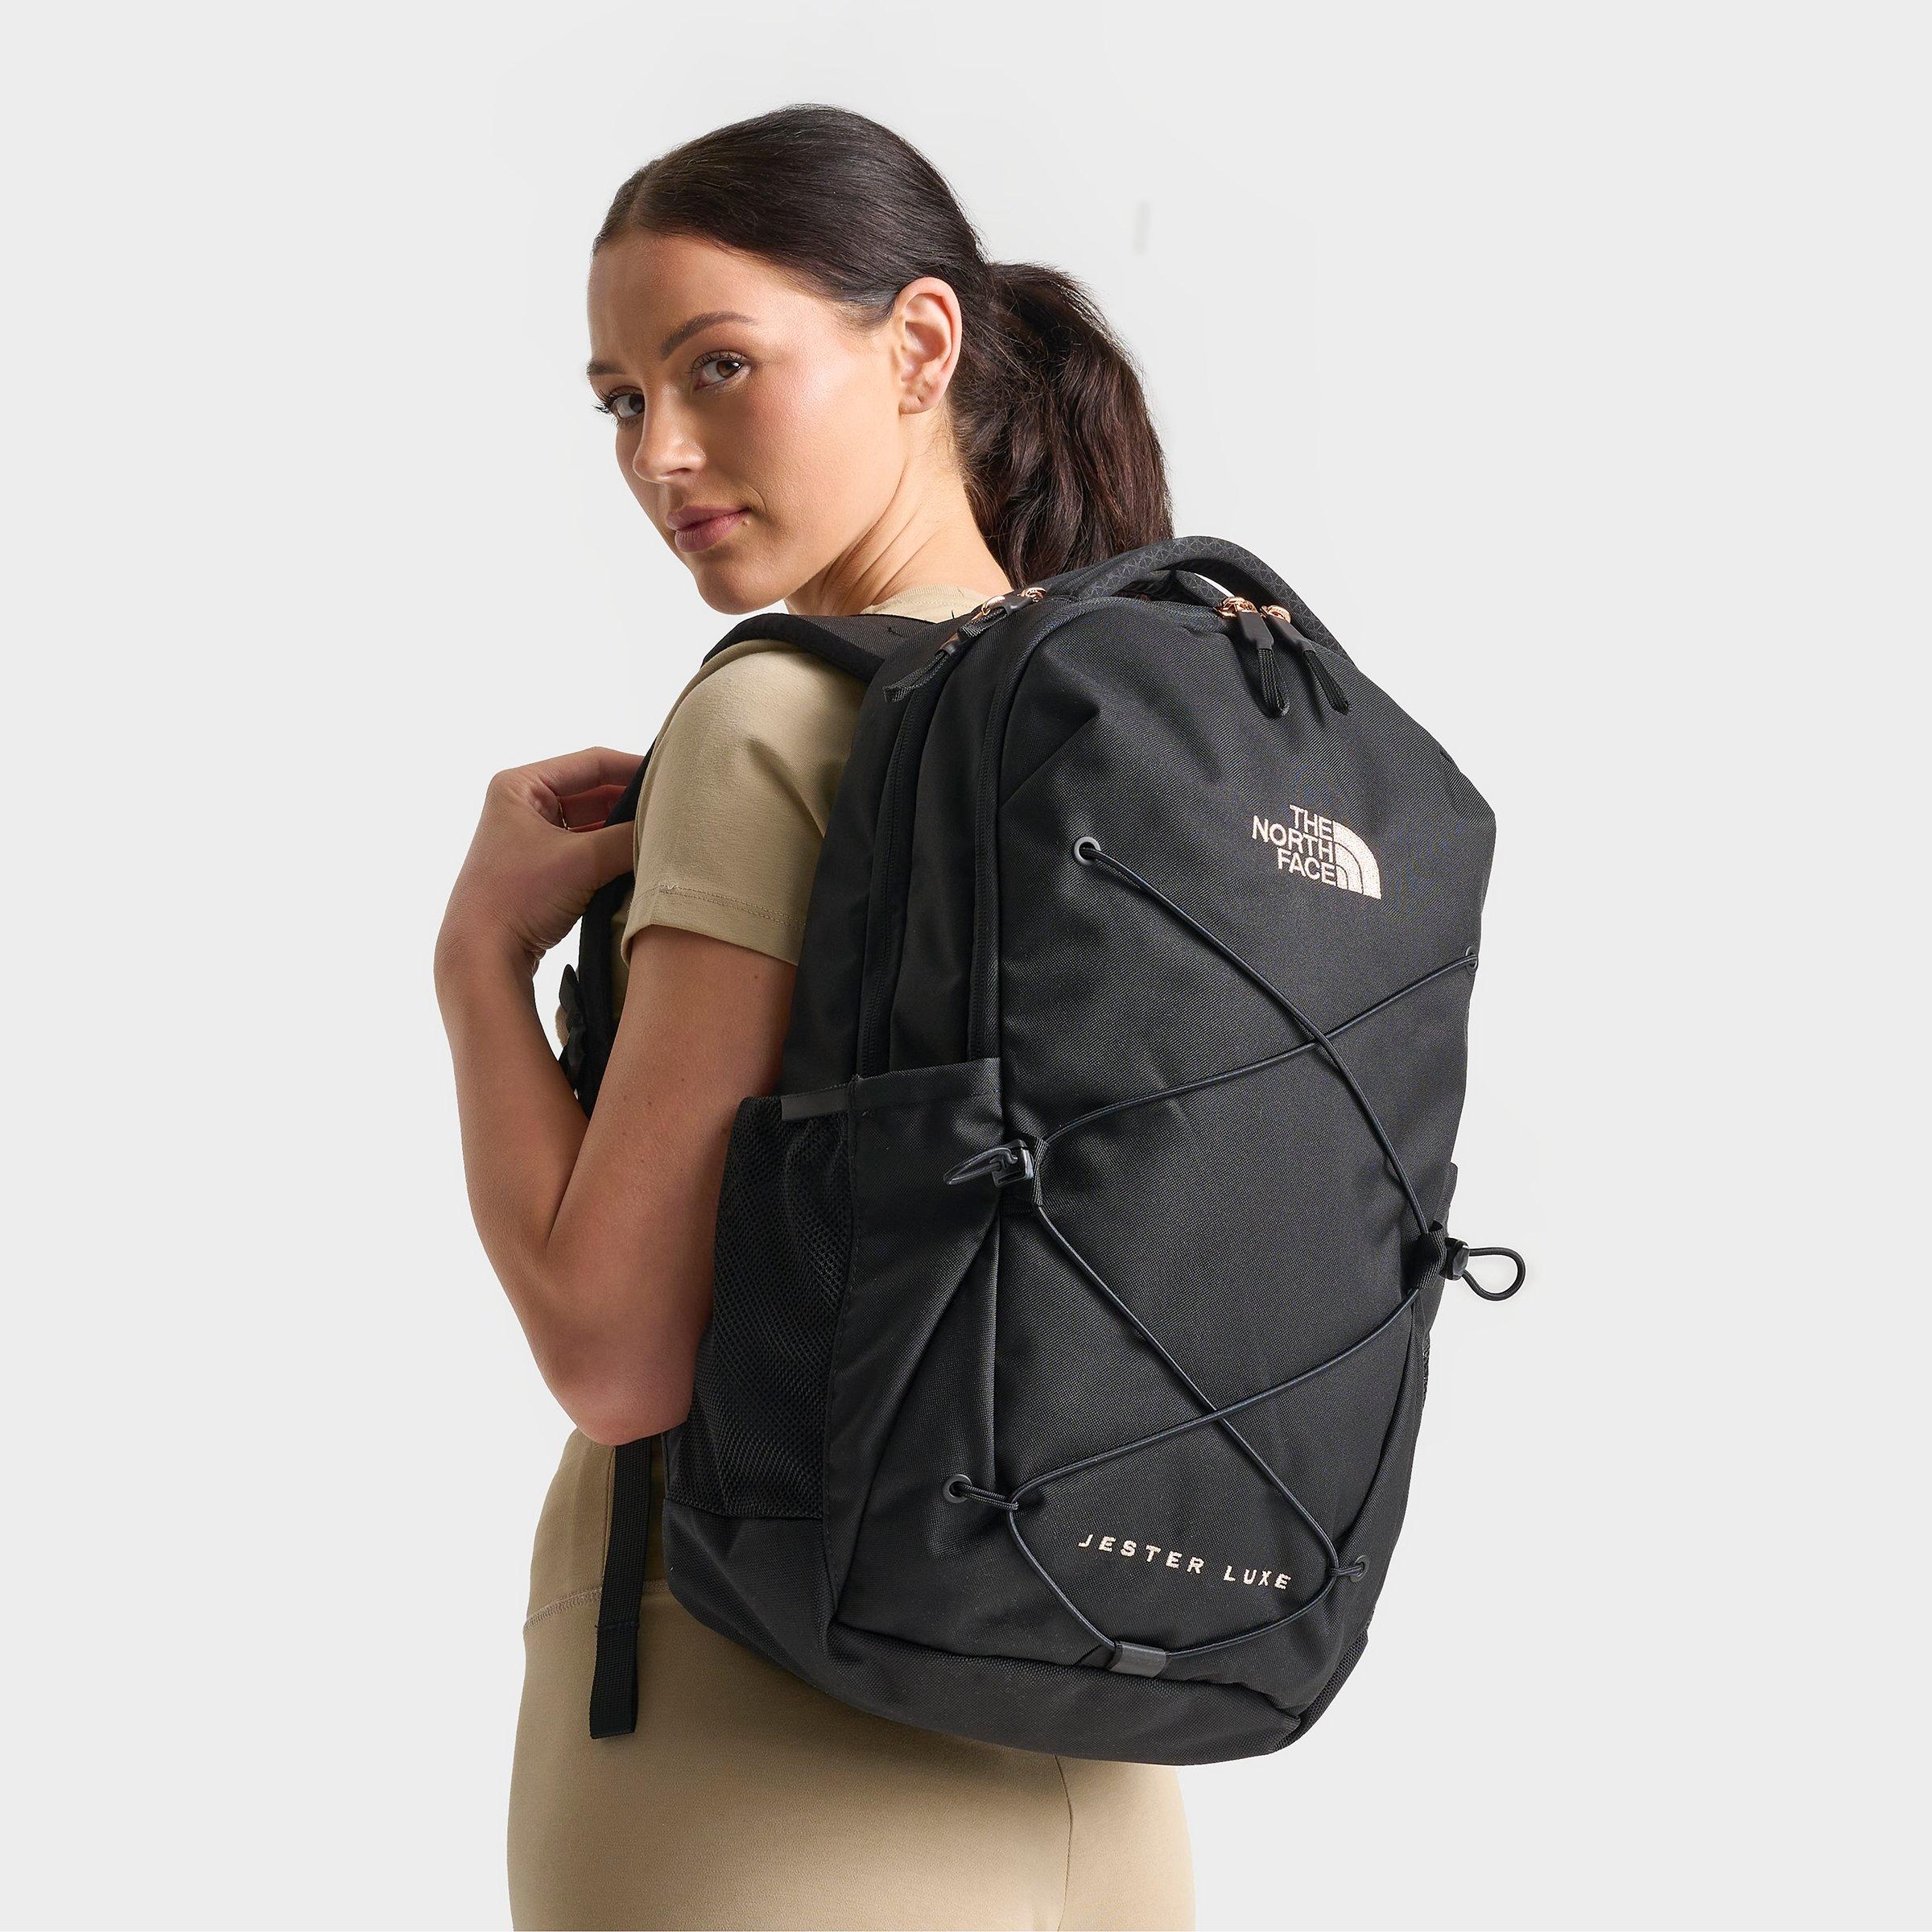 The North Face Bags & Backpacks for School